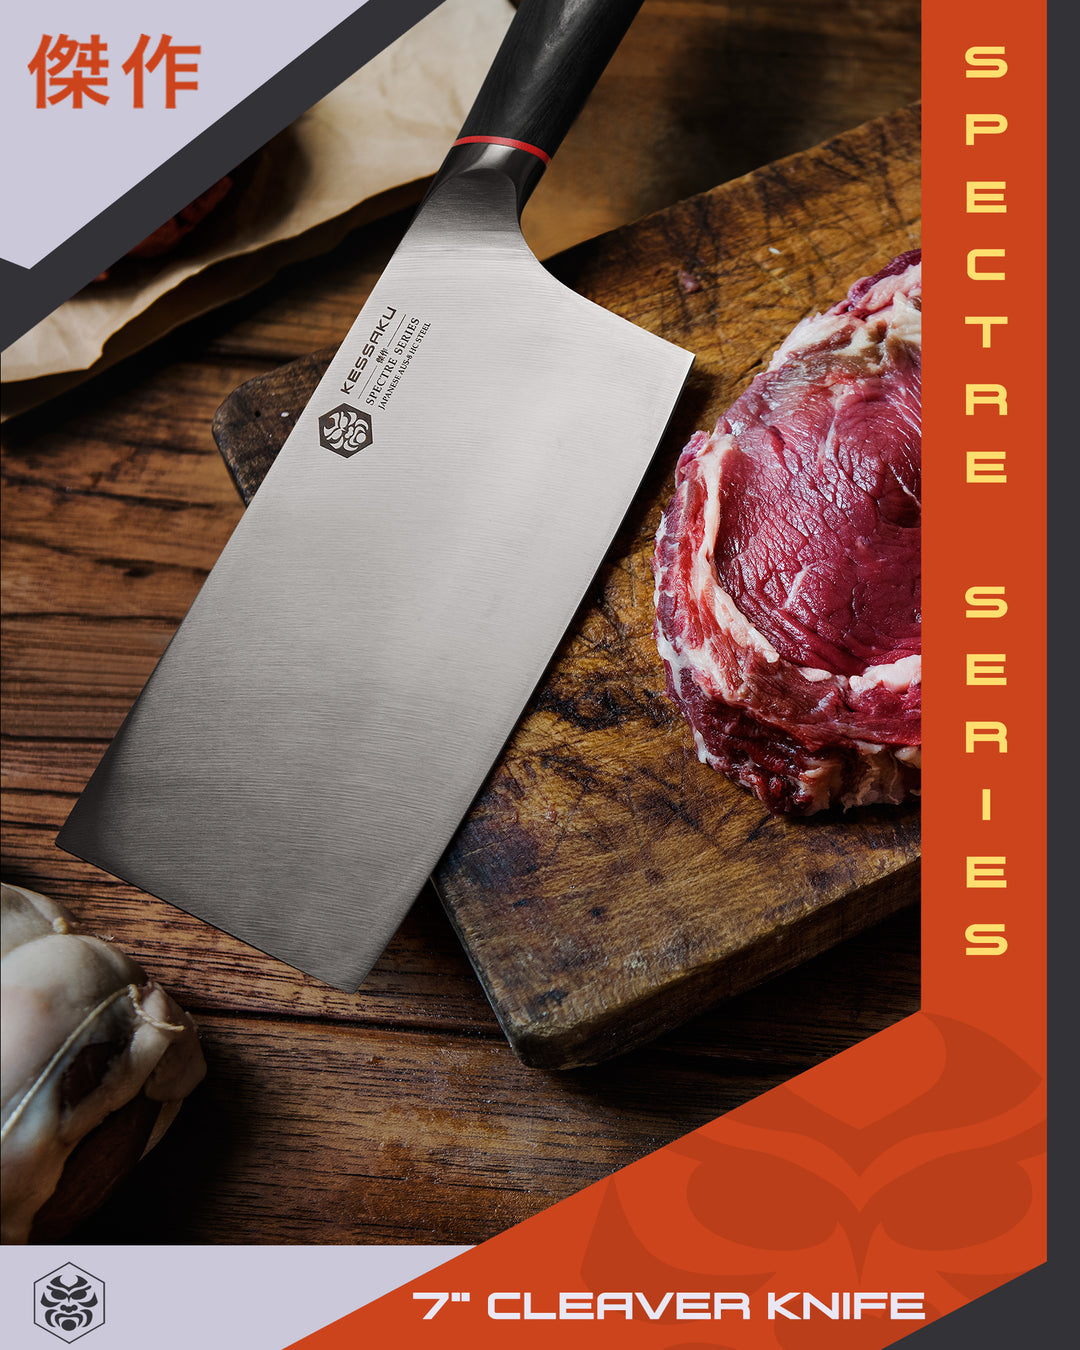 The Spectre Cleaver on a cutting board with a perfectly trimmed cut of steak